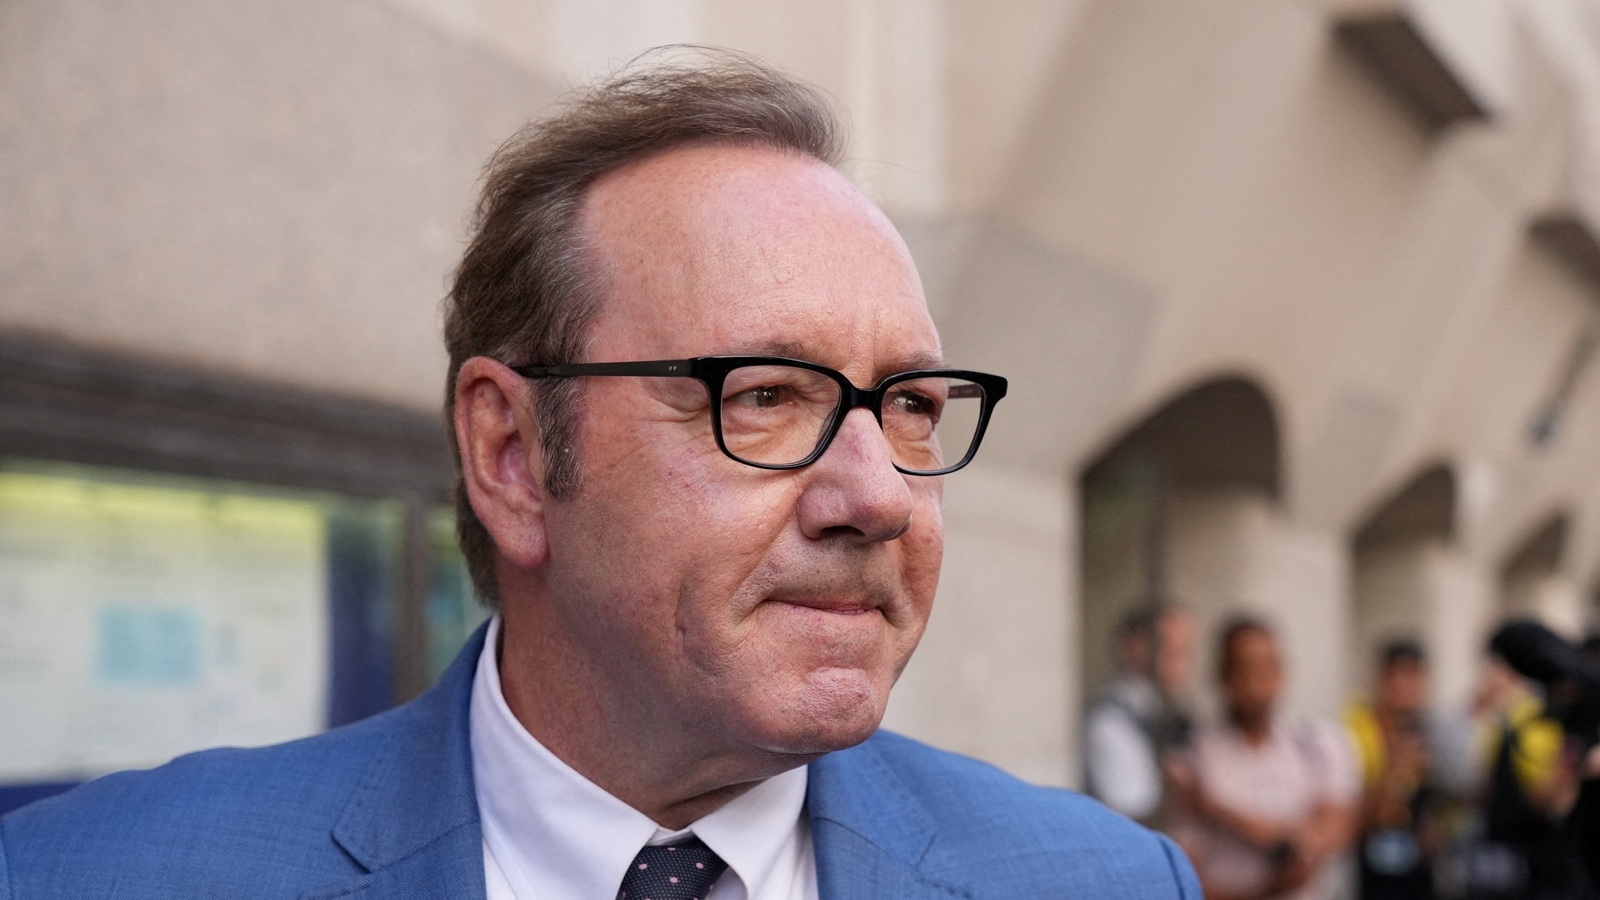 Kevin Spacey Pleads Not Guilty In Uk Court To Sex Offence Charges World News Hindustan Times